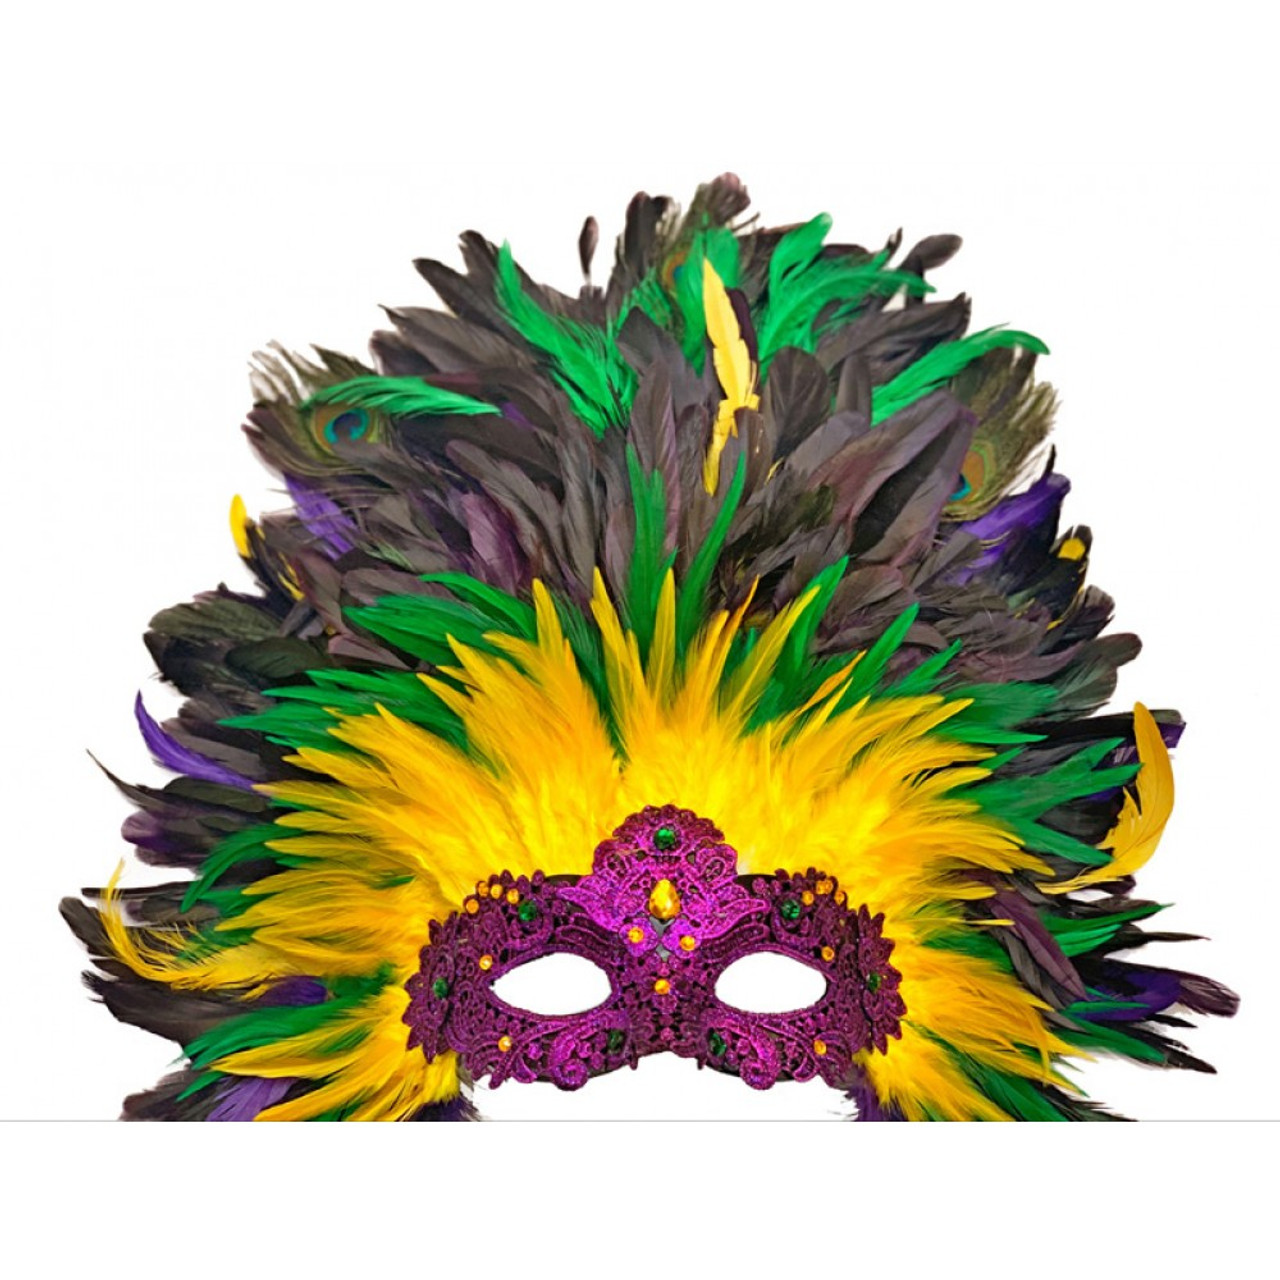 Lv Mardi Gras Sequined Mask Decorated With Feathers On A Bed Of